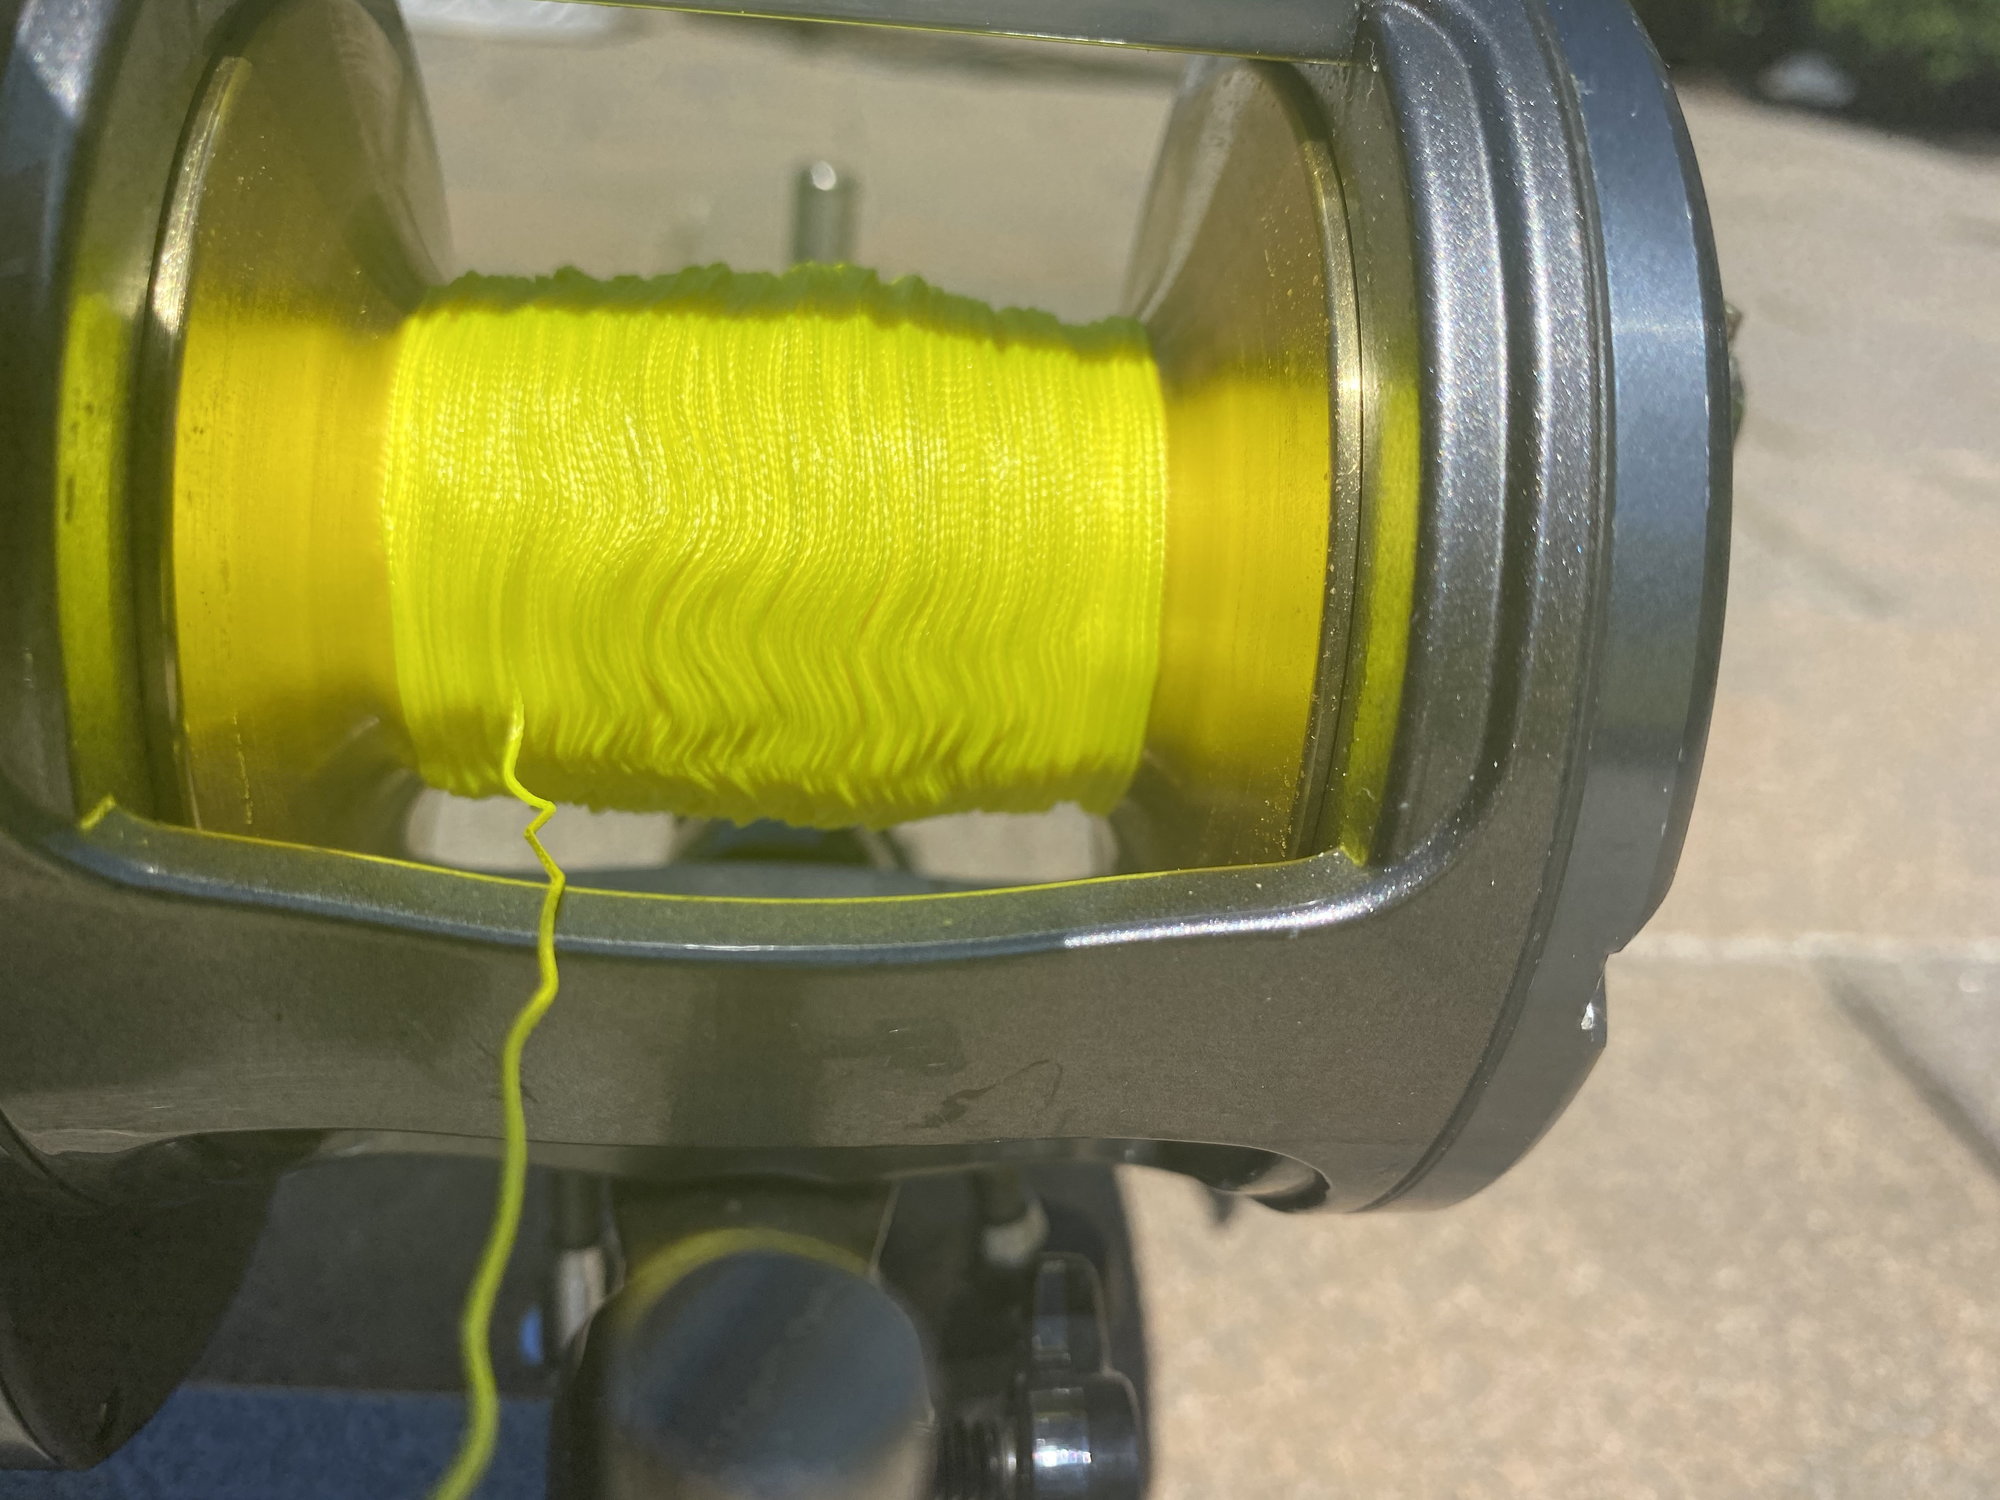 Homemade reel spooling ideas - The Hull Truth - Boating and Fishing Forum